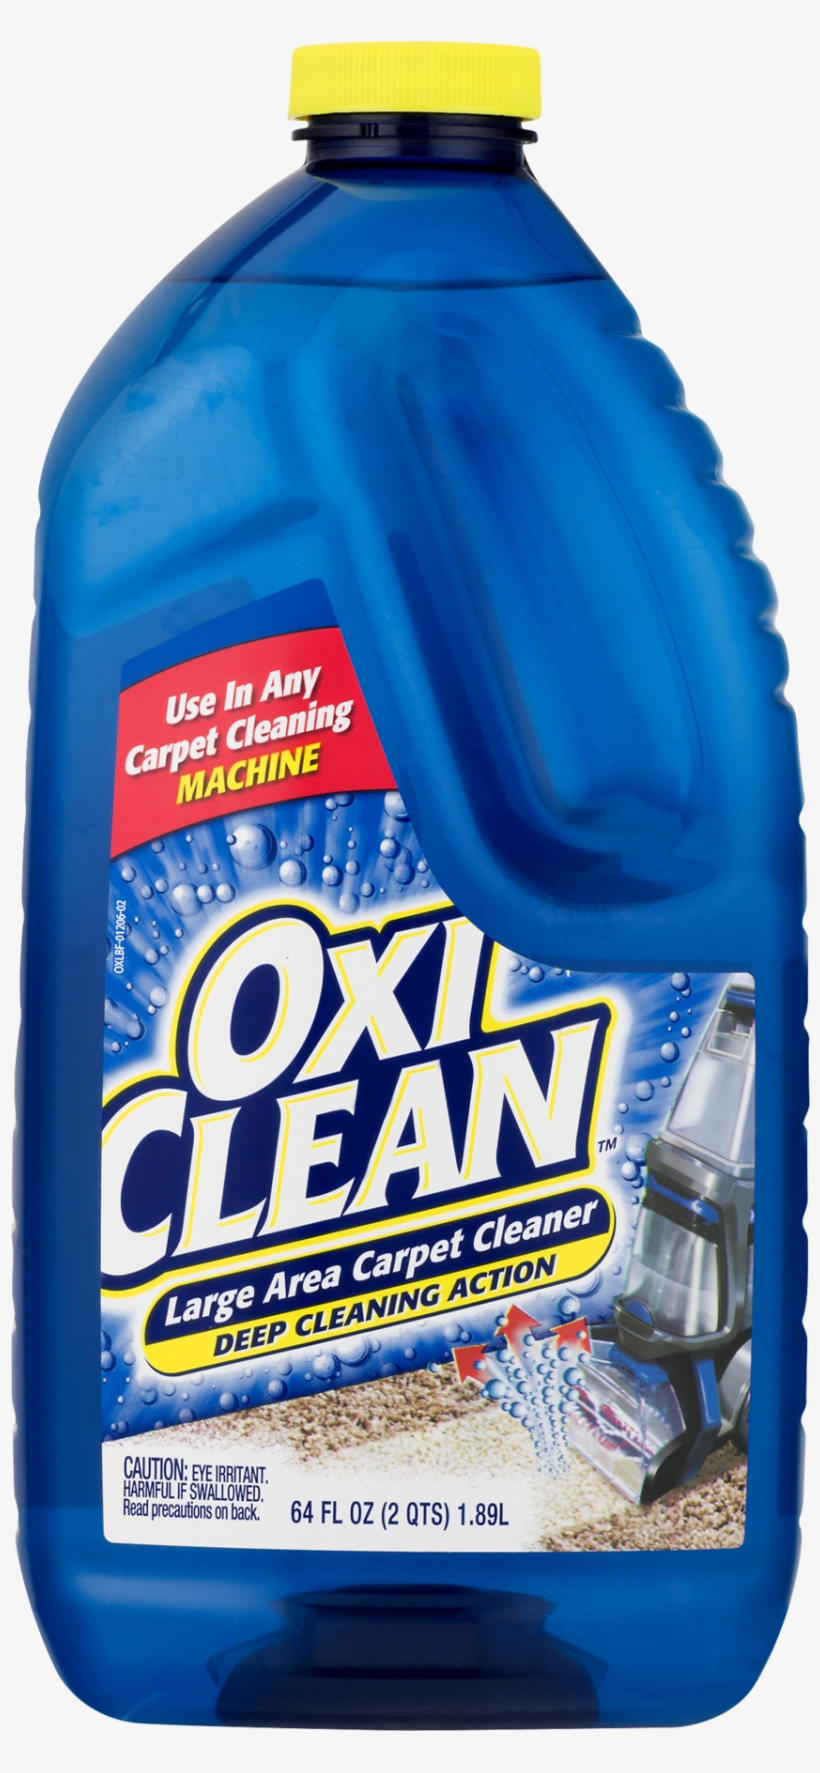 Oxiclean Carpet Cleaner, transparent png #5939520